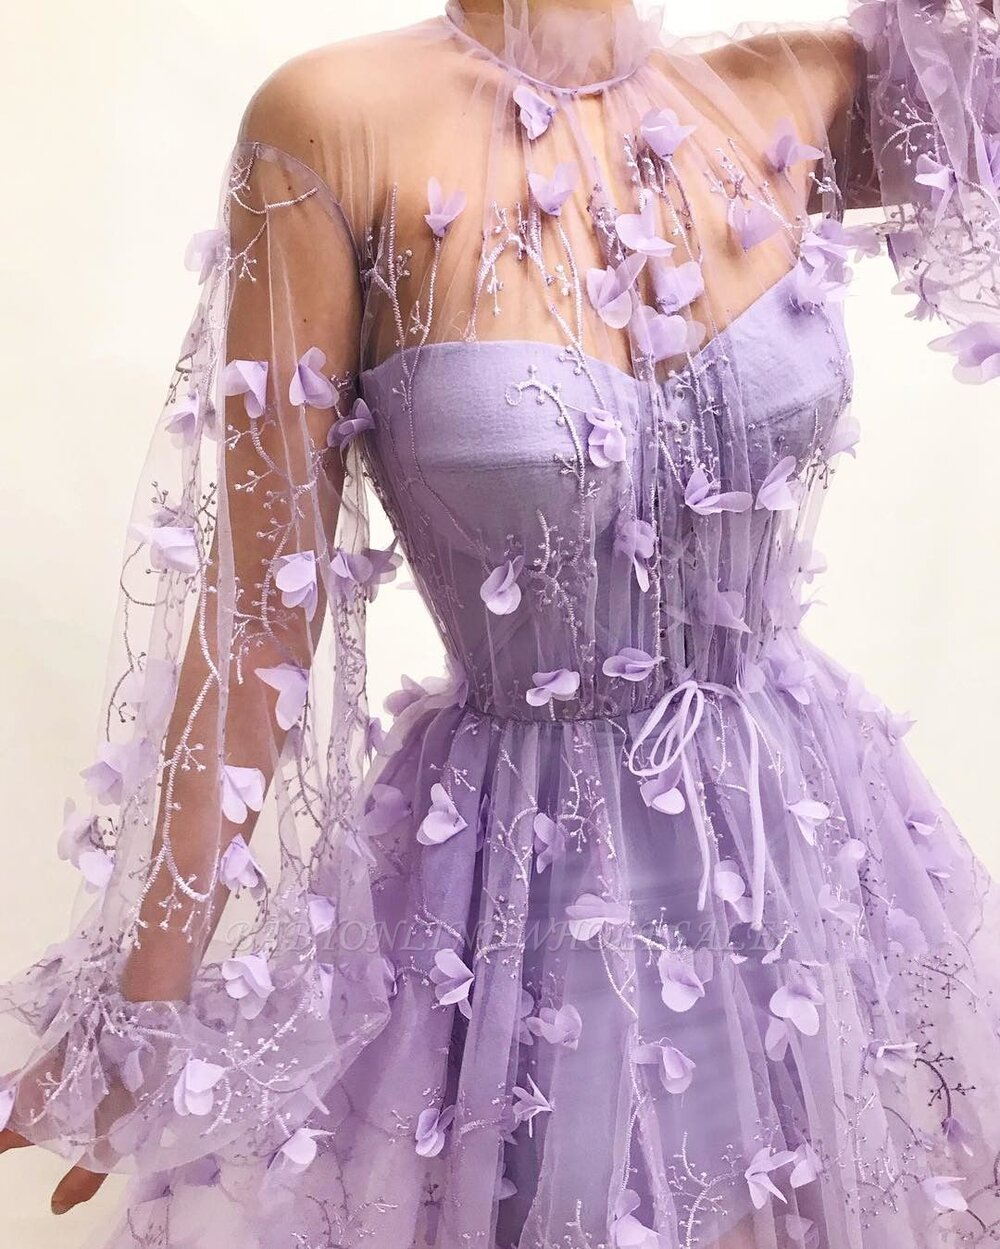 Sexy Tulle High Neck Front Slit Prom Dress _ Chic Appliques Flowers Long Sleeves Prom Dress.jpeg